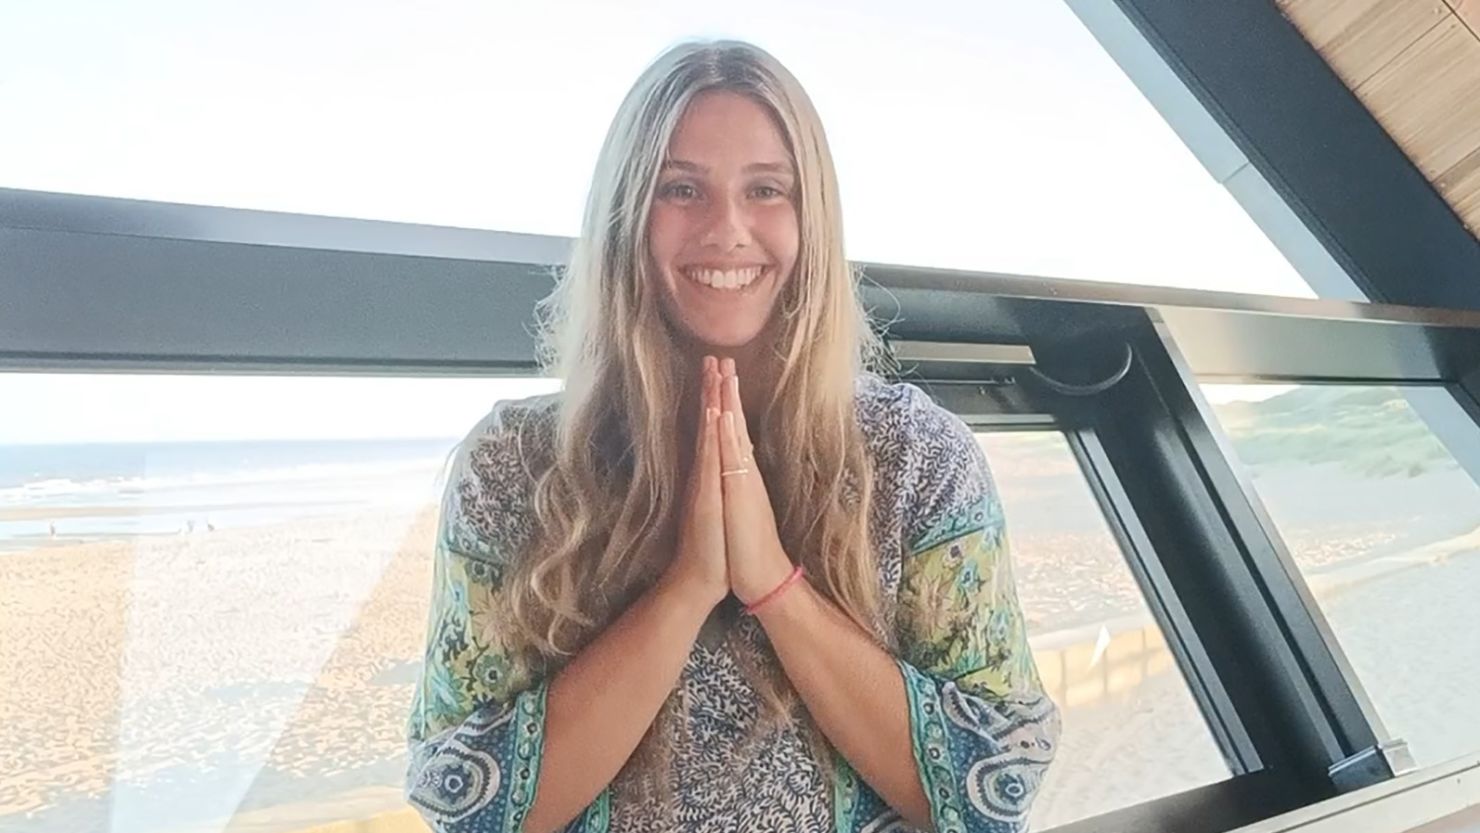 Yoga teacher Millie Laws said it was "surreal" that somebody called the police after mistaking her class for a mass killing. 